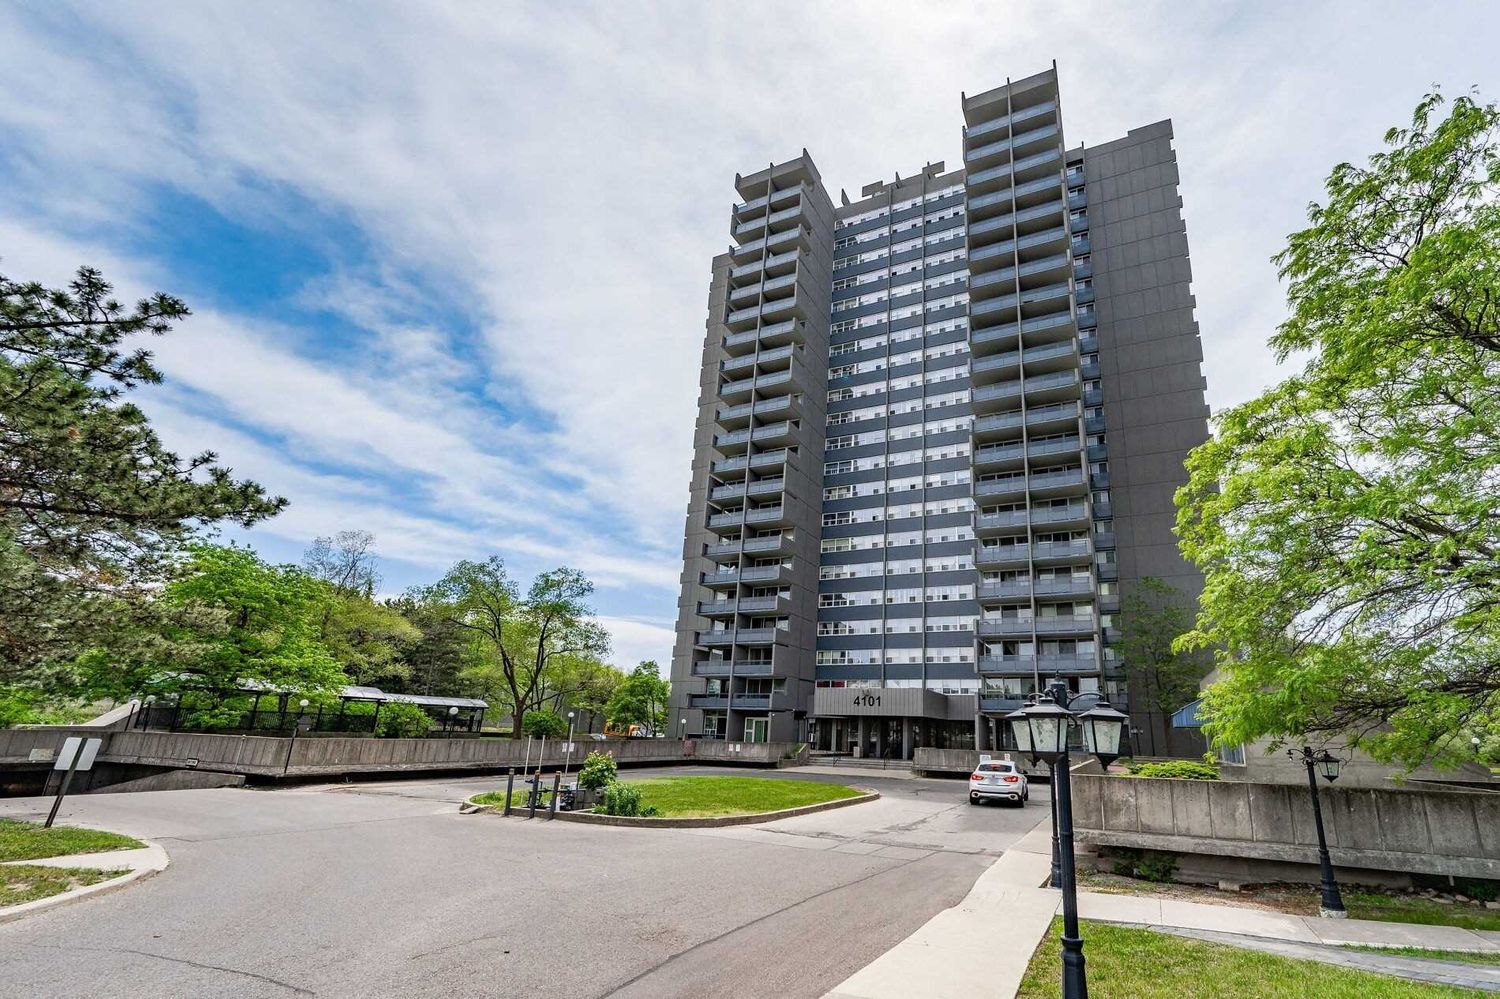 4101 Sheppard Avenue E. 4091-4101 Sheppard Avenue East Condos is located in  Scarborough, Toronto - image #1 of 2